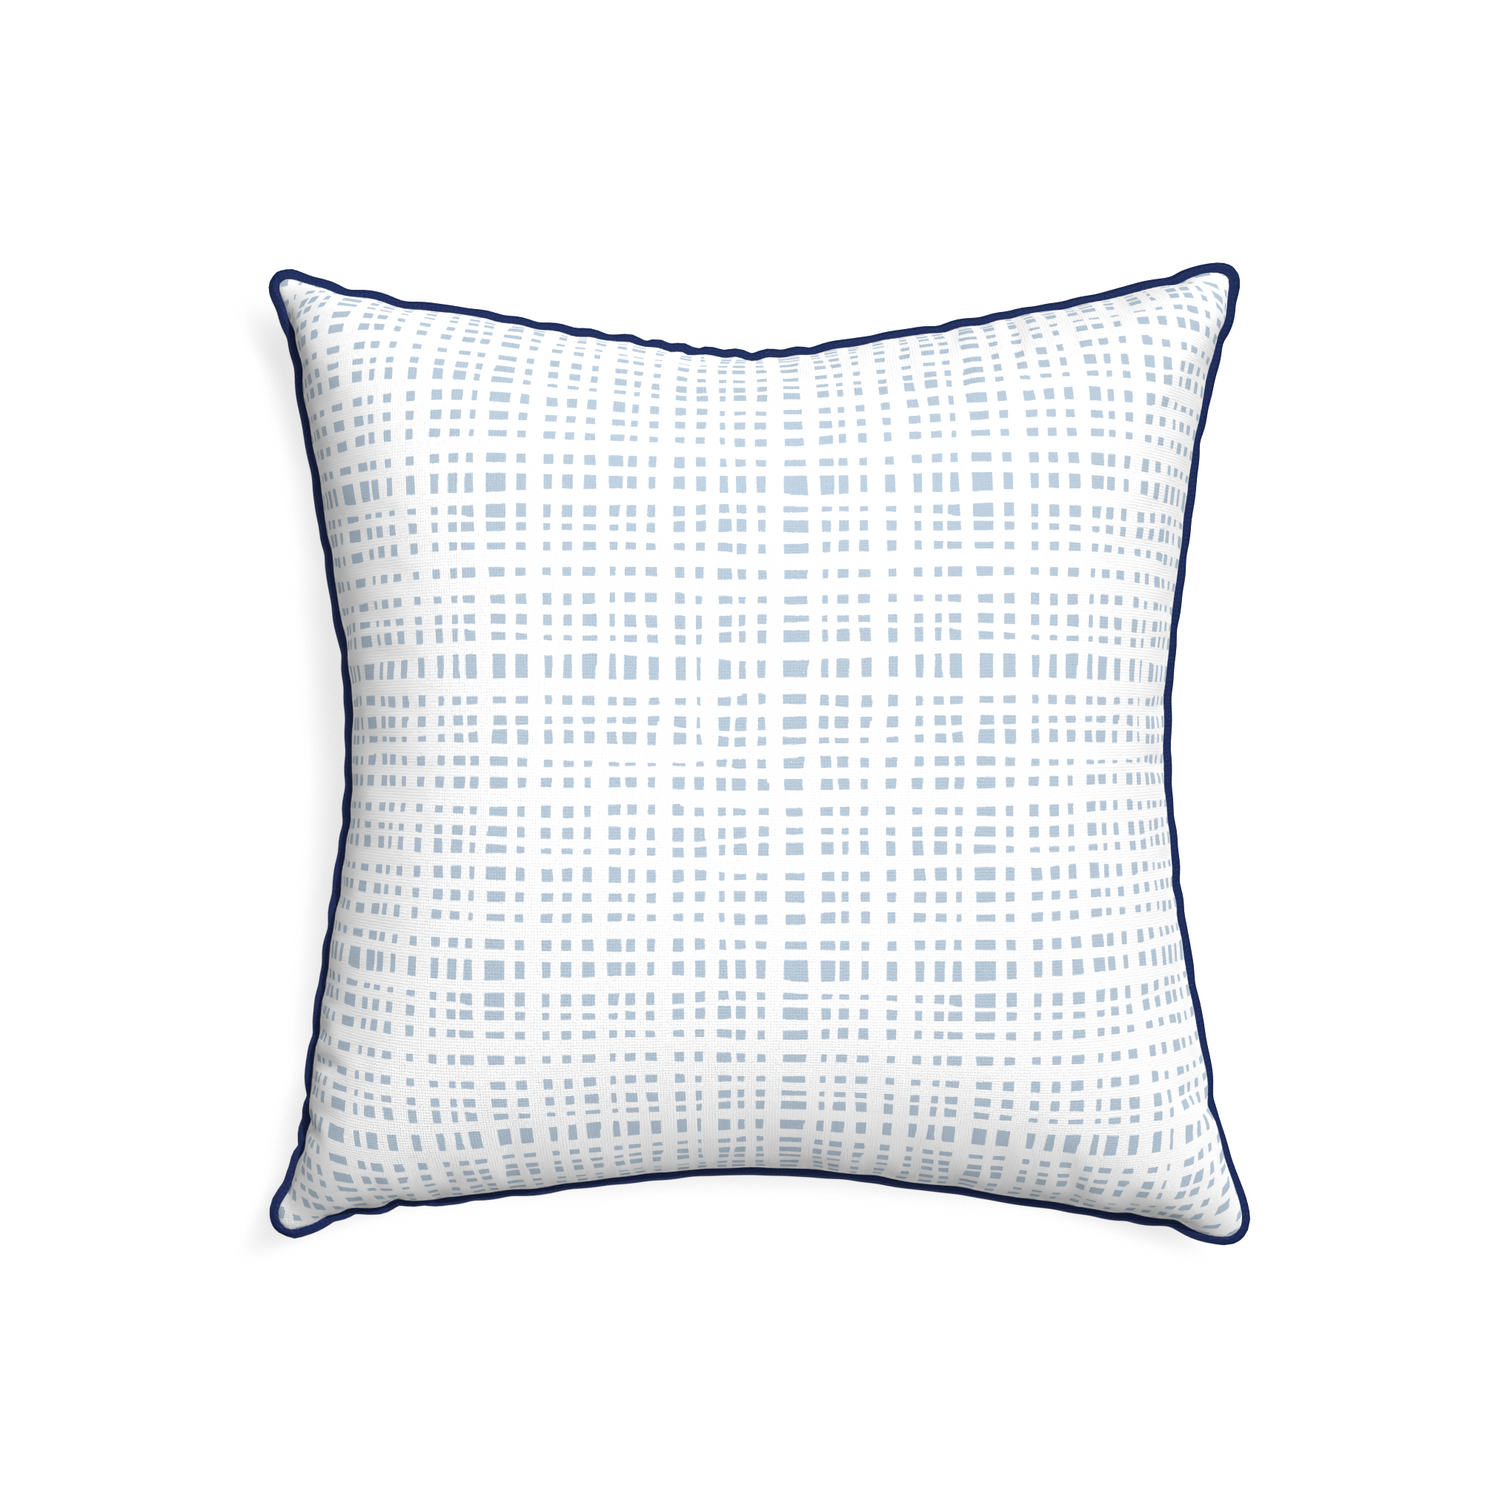 22-square ginger sky custom pillow with midnight piping on white background